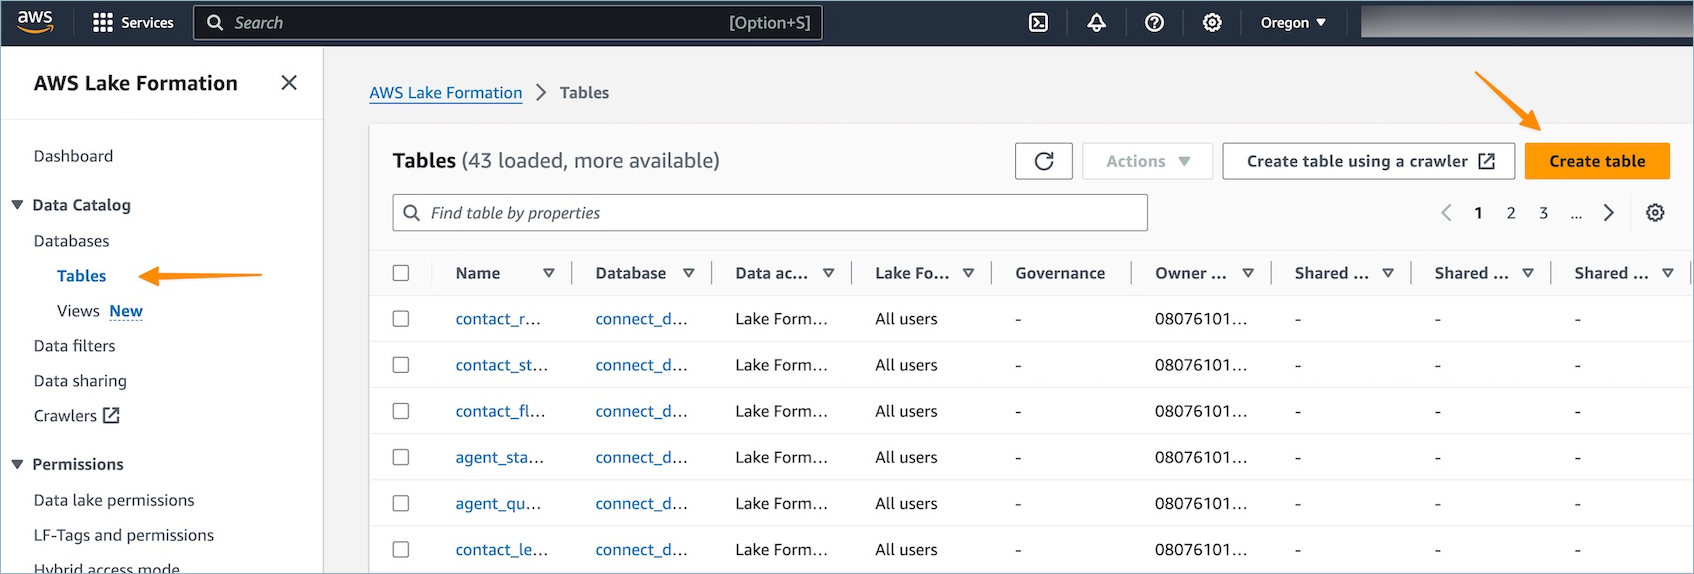 AWS Lake Formation console.